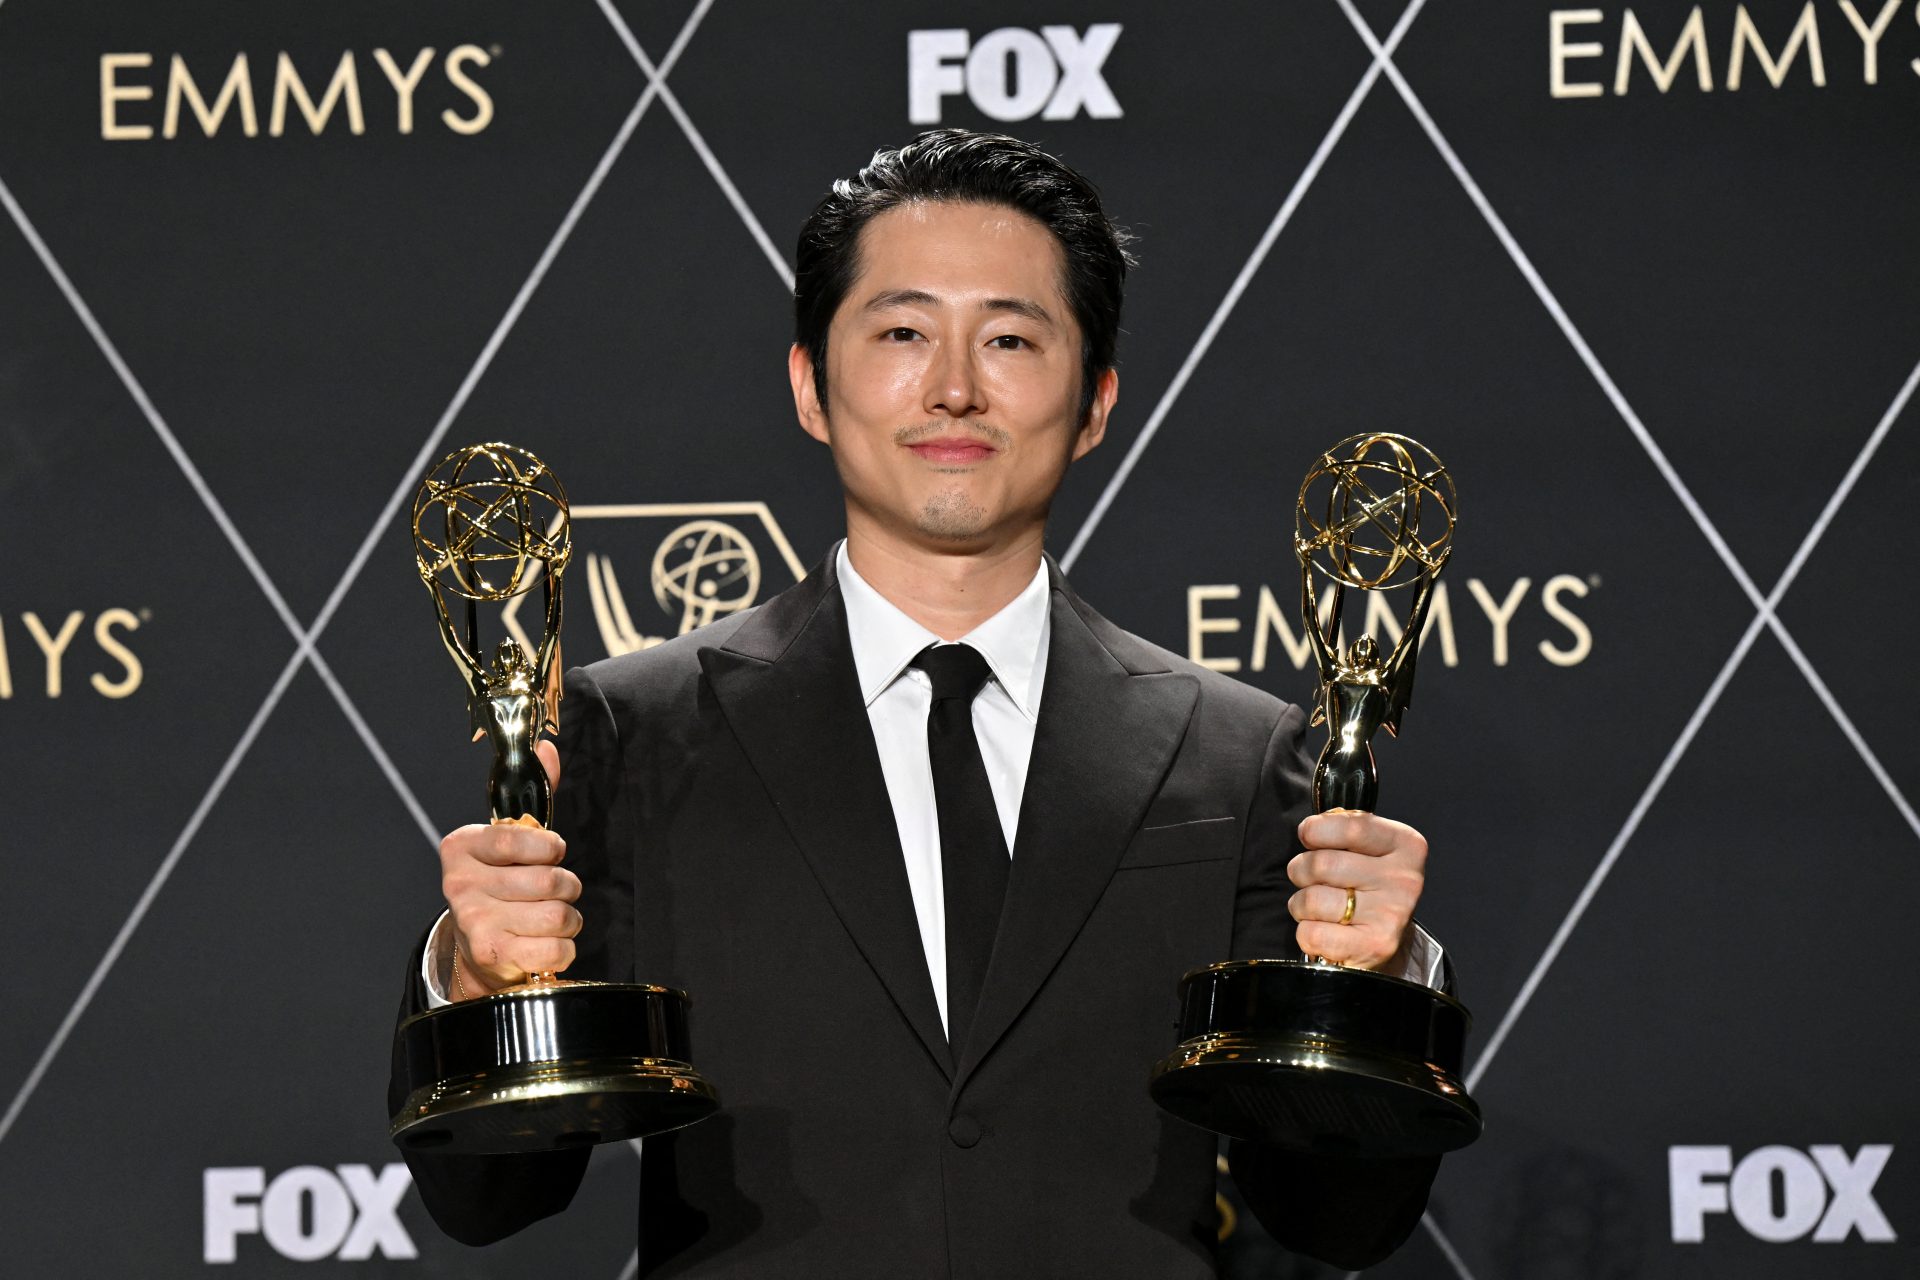 Steven Yeun: out of Marvel but bagging Emmys and Golden Globes!